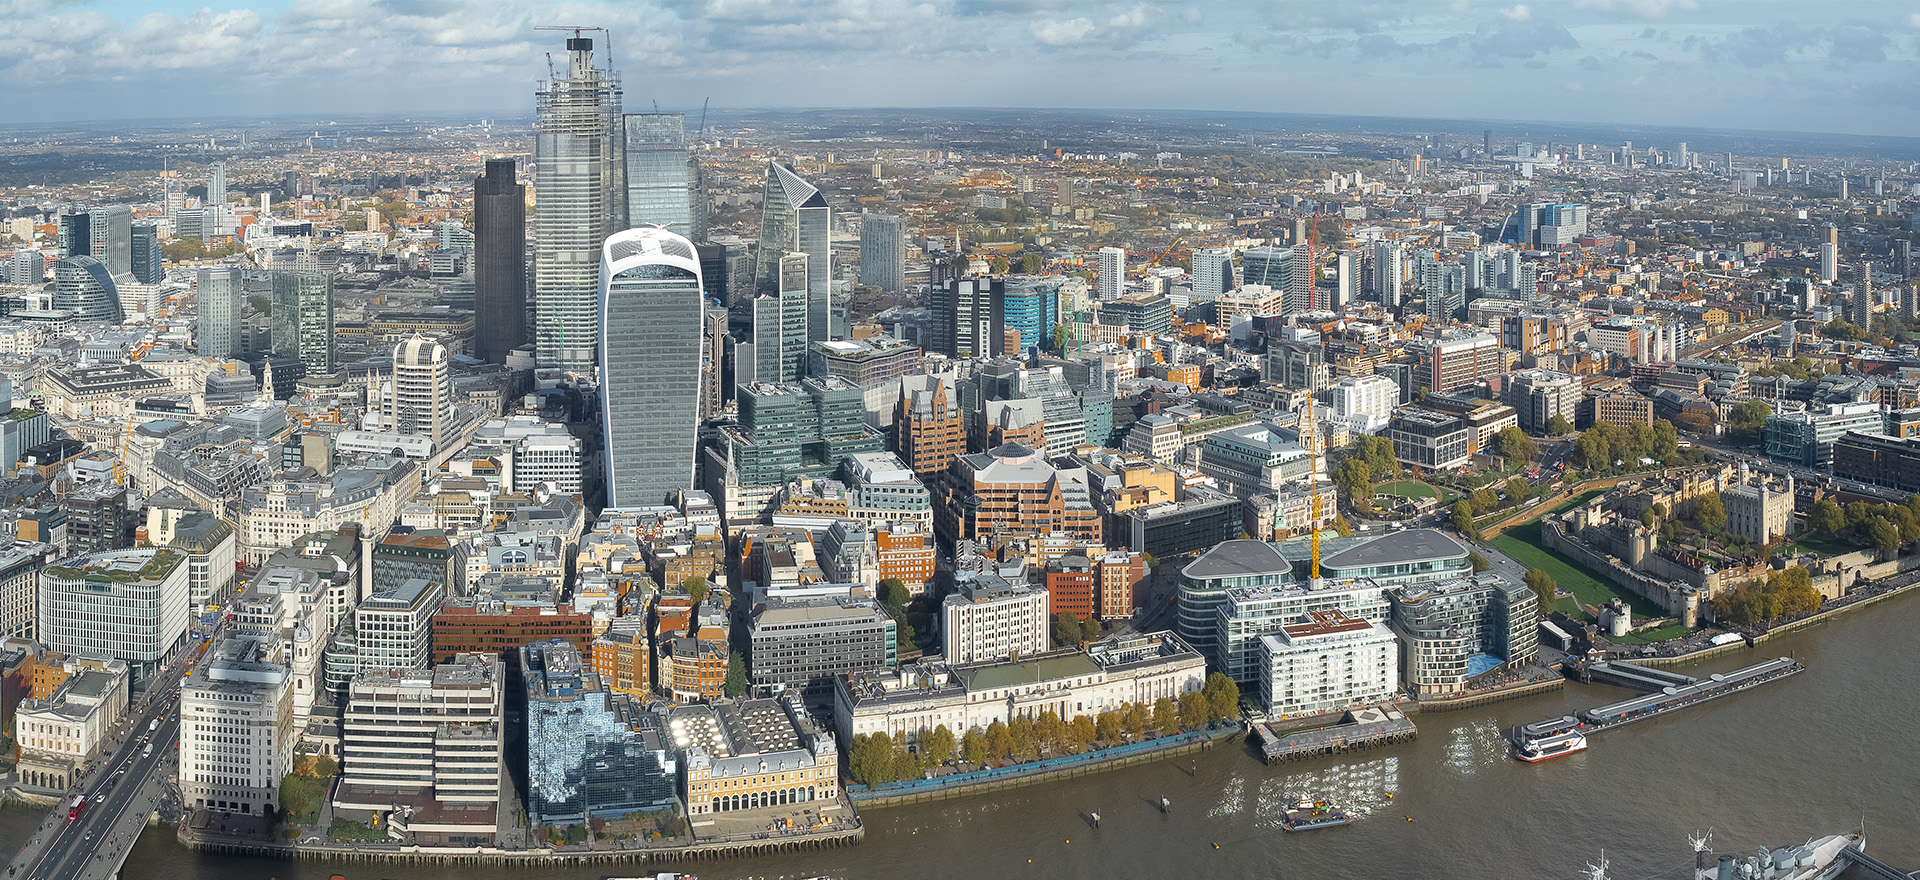 Planning for climate change: Is London leading the way?